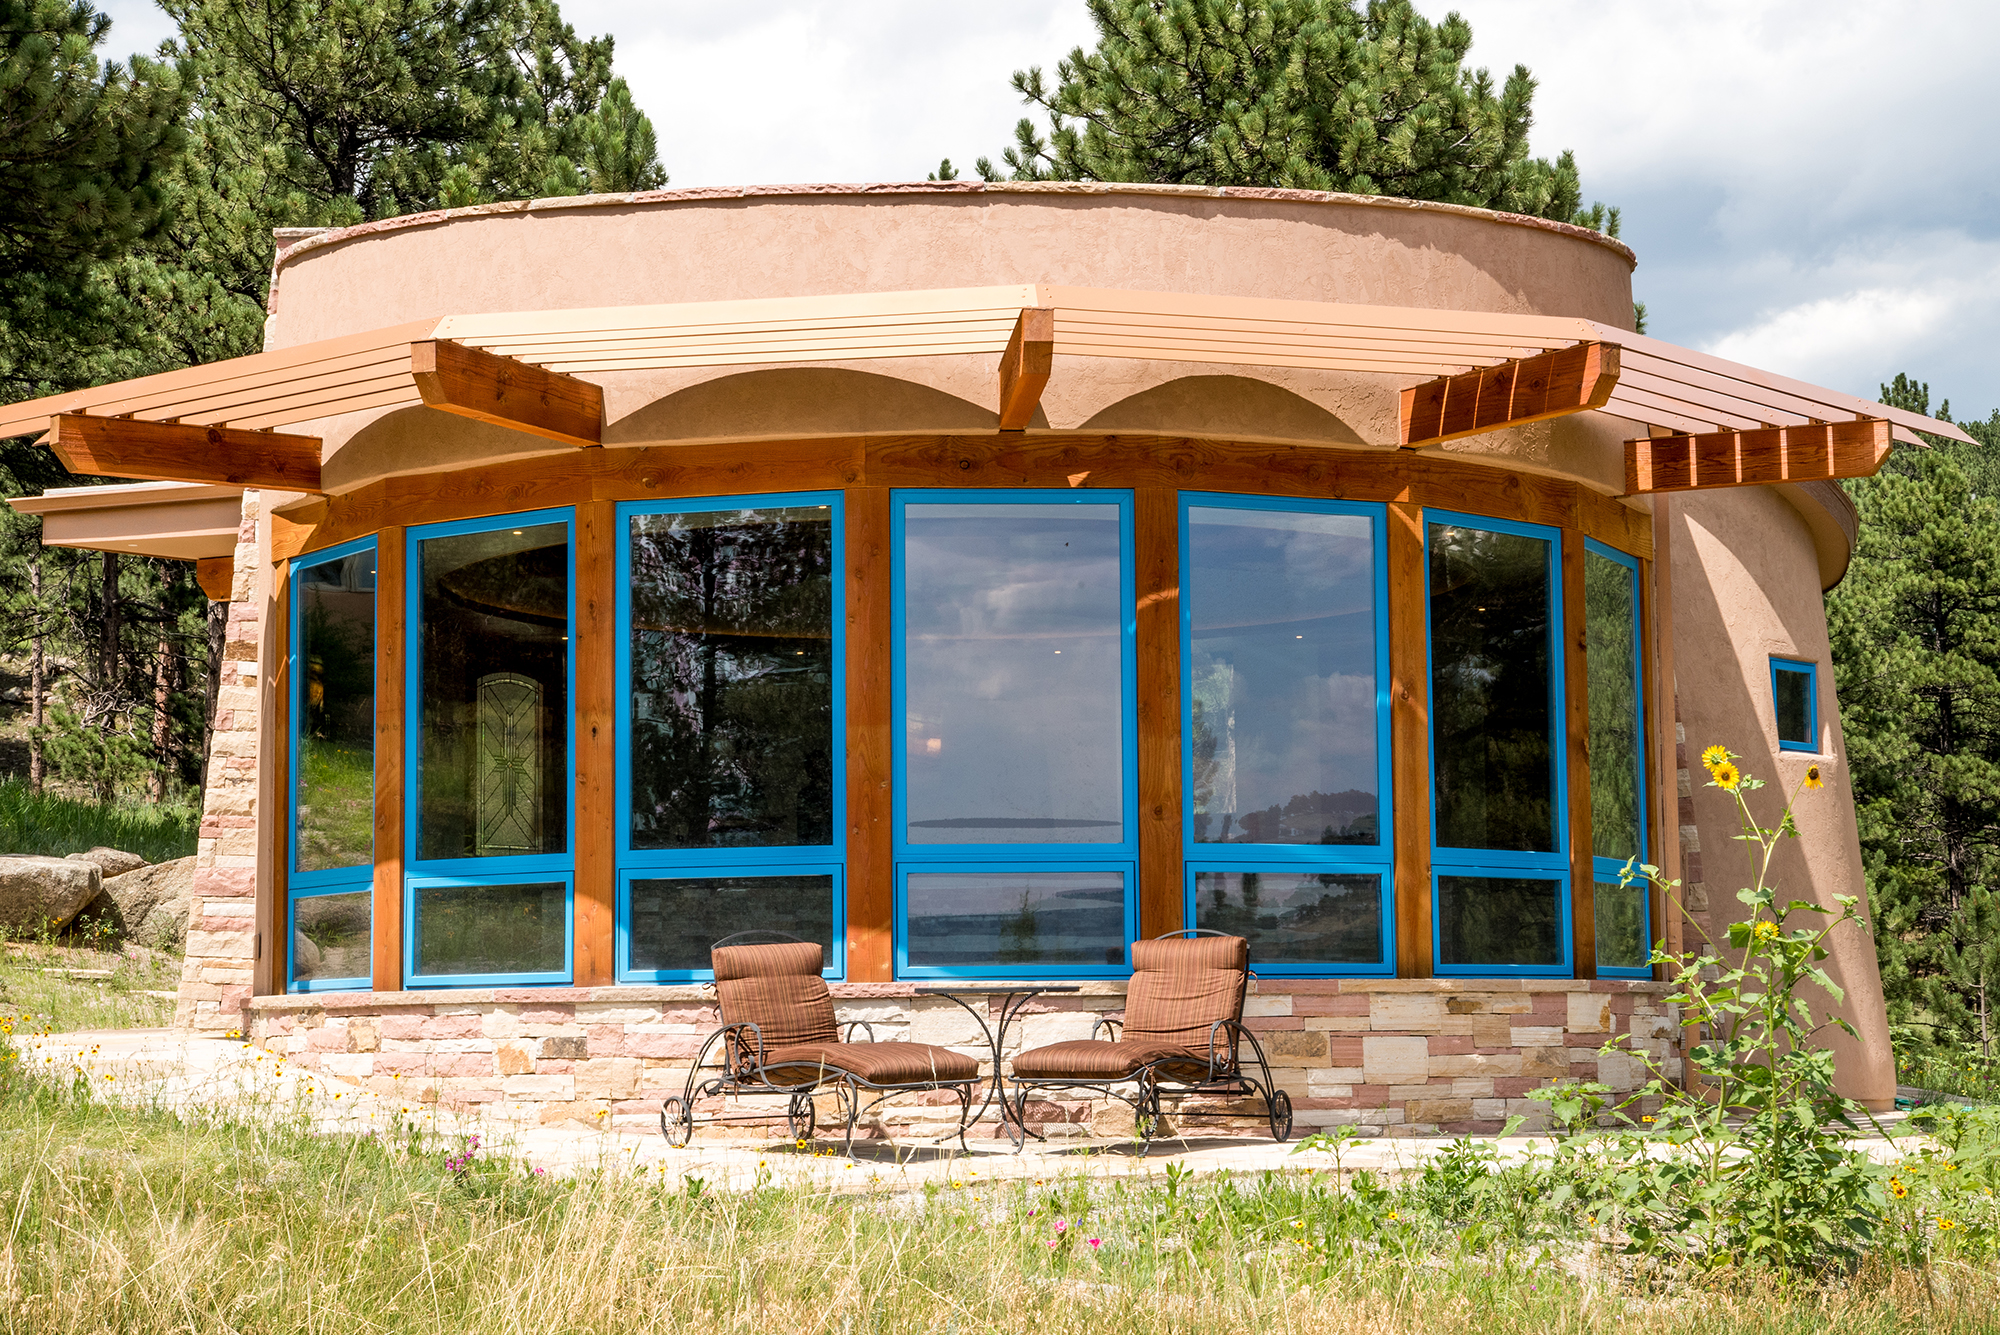 Mountain Kiva pool house with solar power and shades that reduce energy consumption by blocking afternoon sun in the summer. Built by Cottonwood Custom Builders.